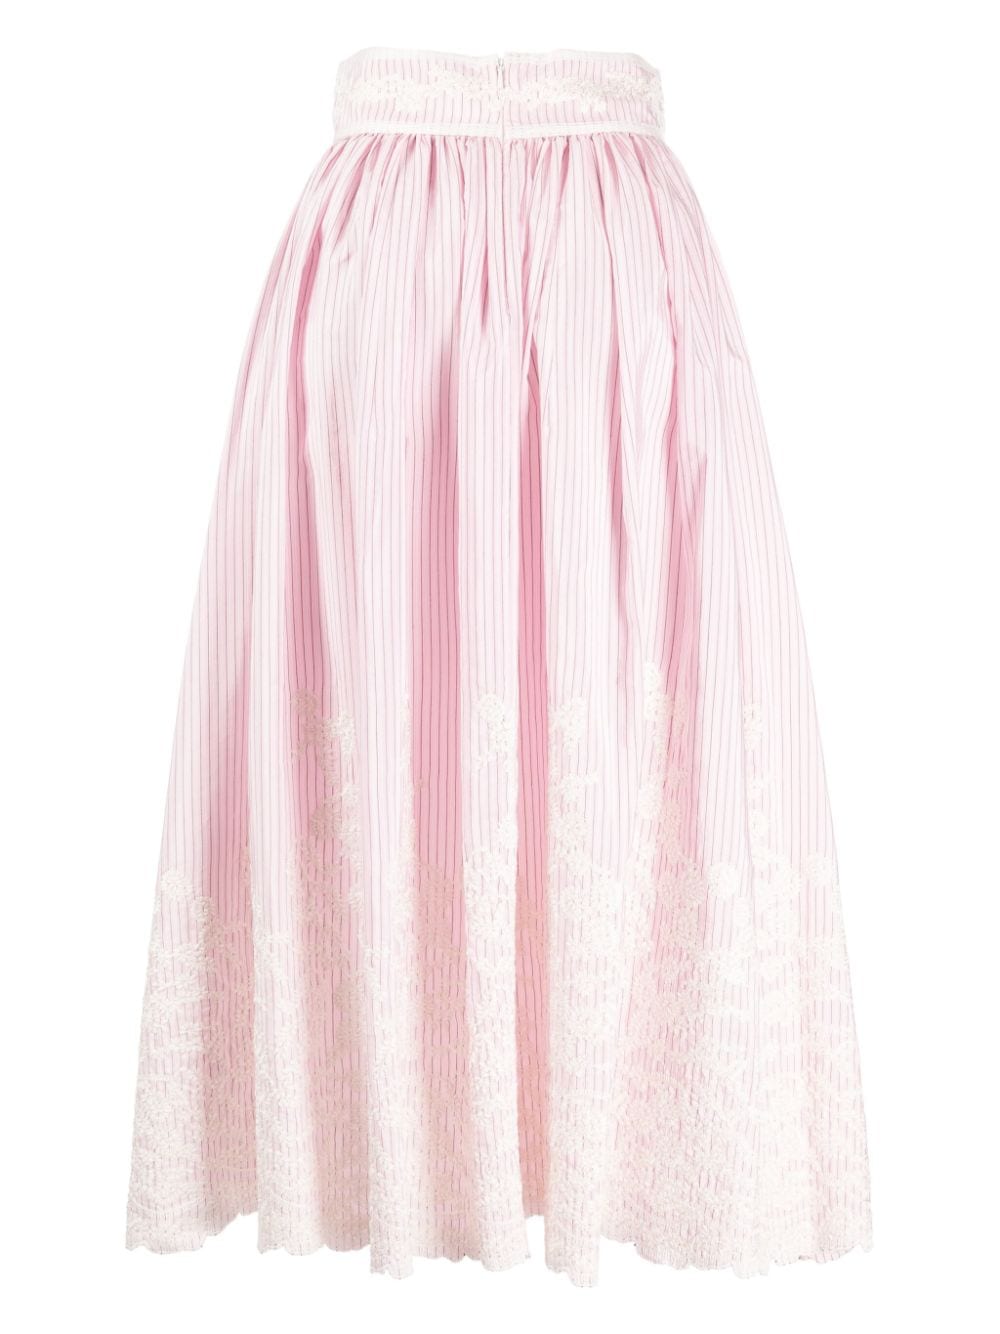 Image 2 of Elie Saab floral-embroidered pinstriped organic cotton skirt